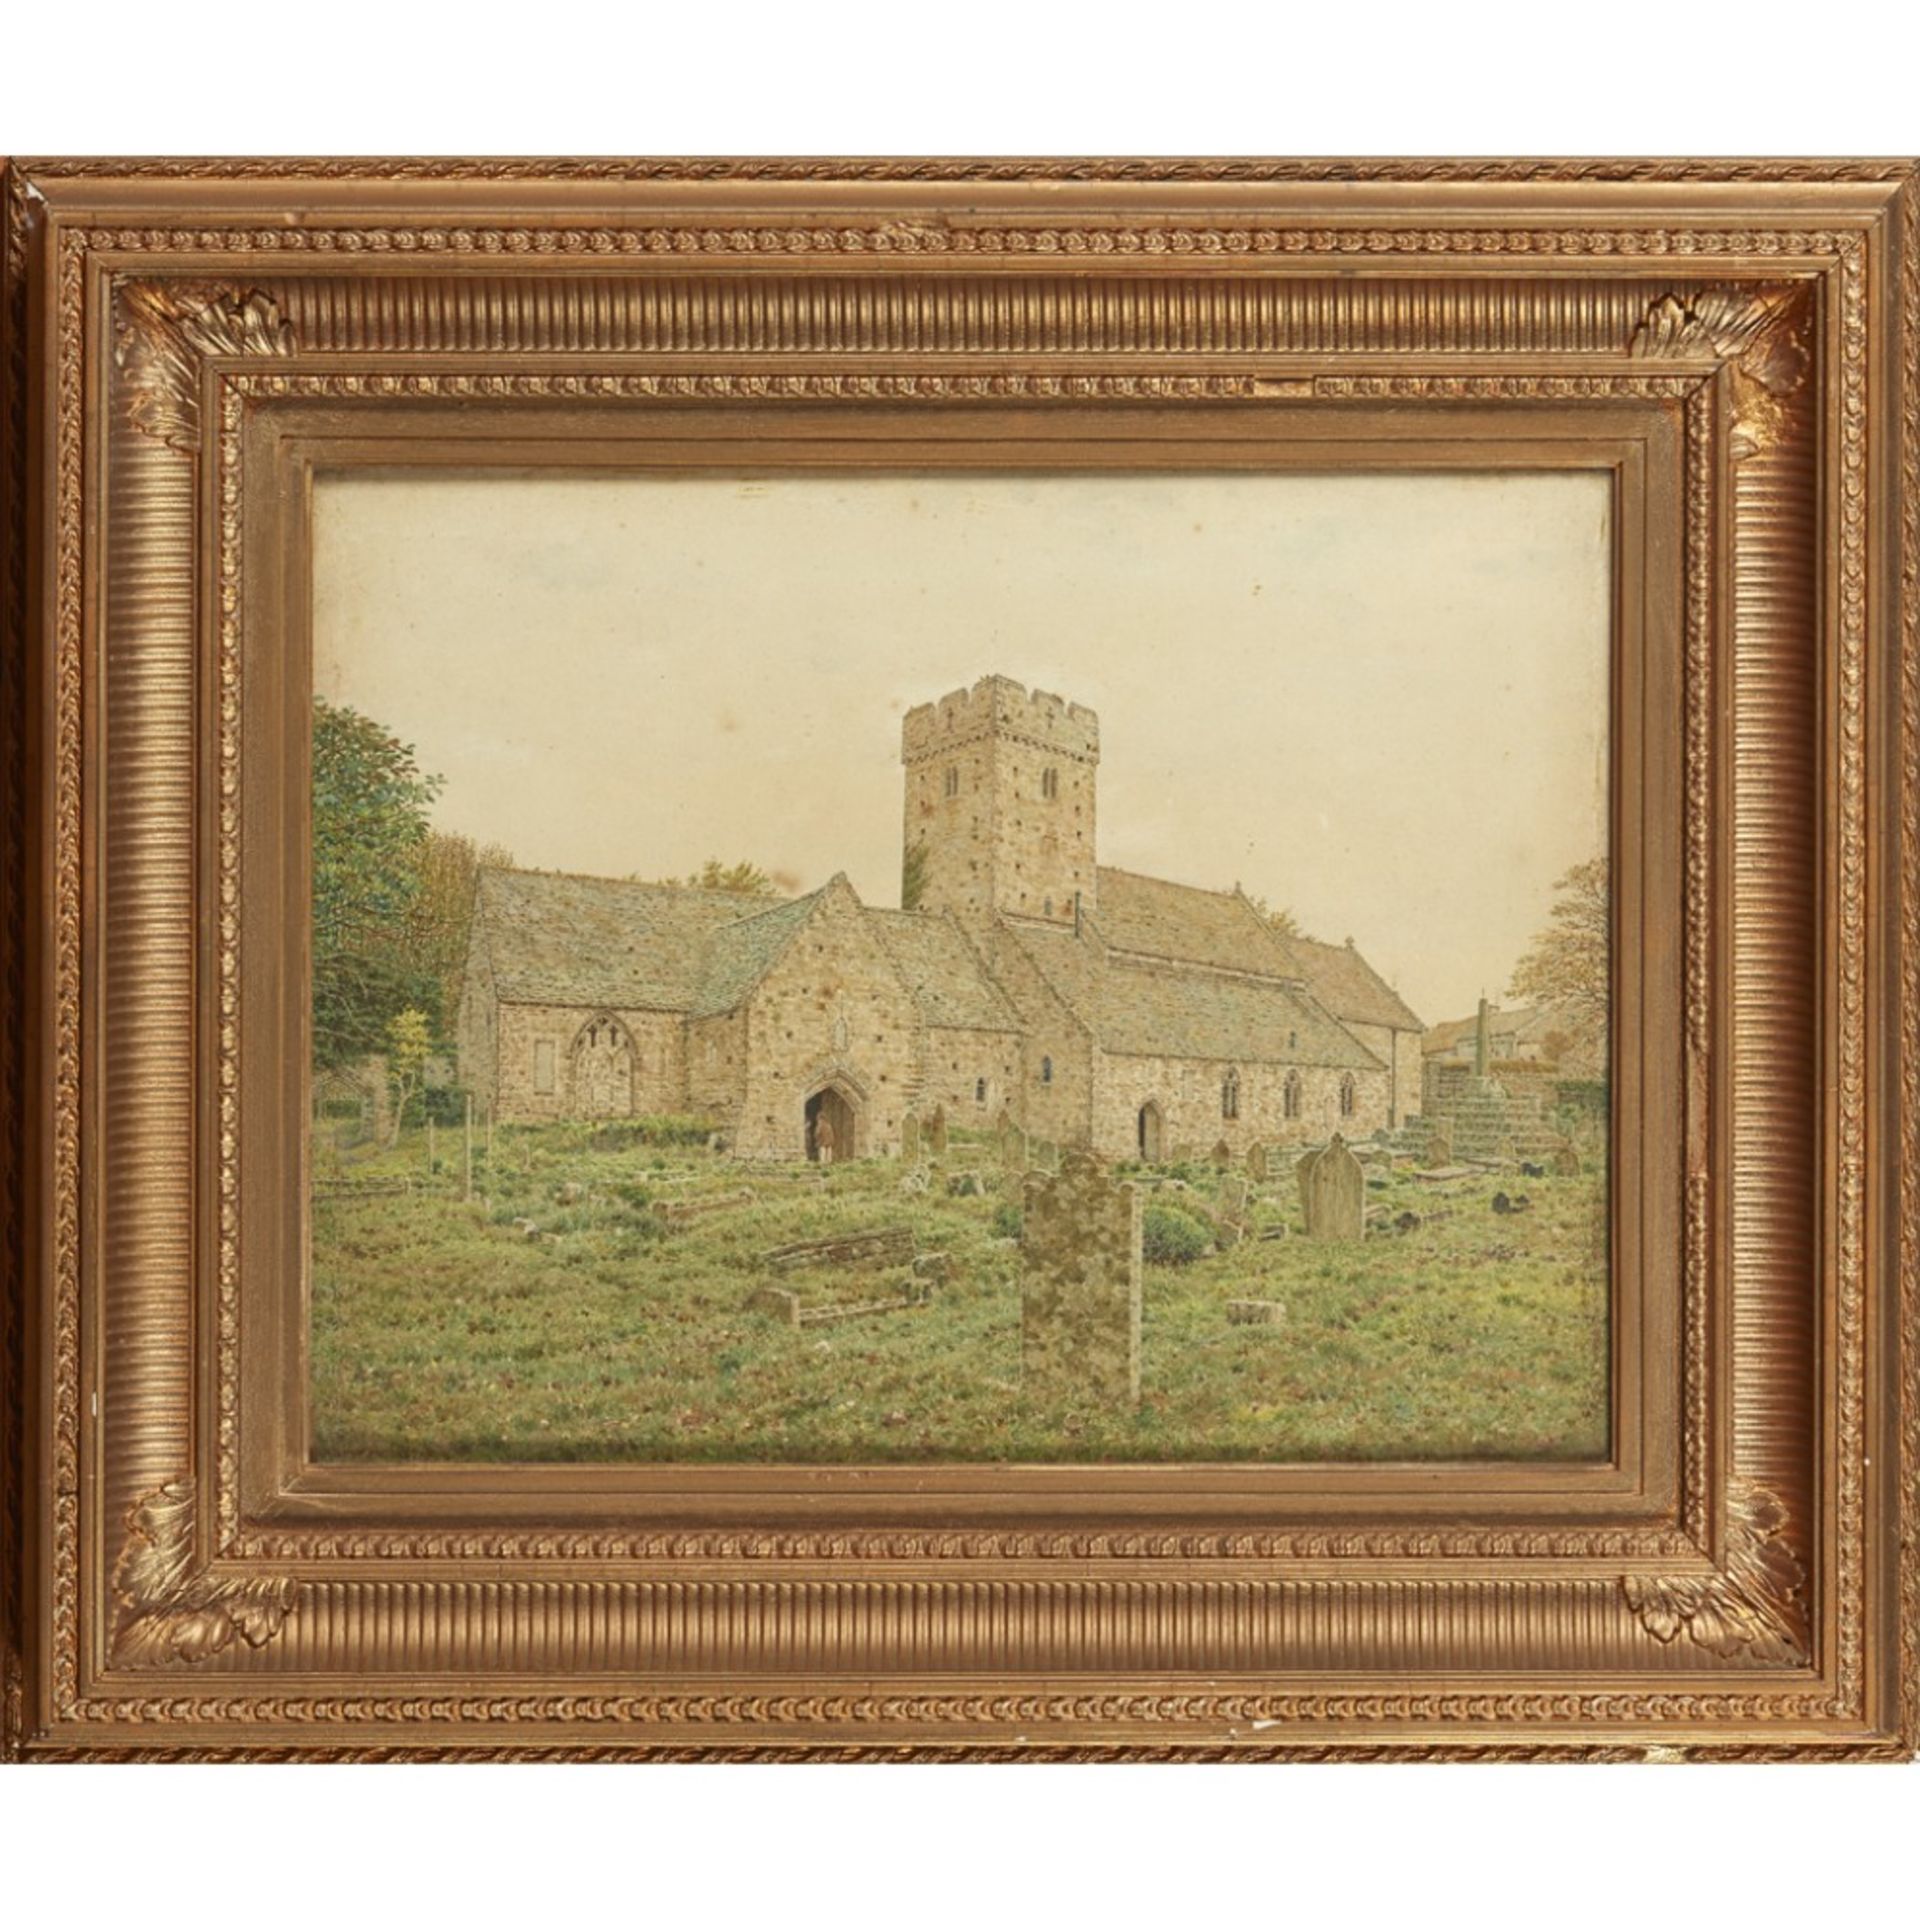 GEORGE PRICE BOYCE (BRITISH 1826-1897)THE DOUBLE CHURCH OF SAINT ILLTYD'S CHURCH AT LLANTWIT - Image 2 of 2